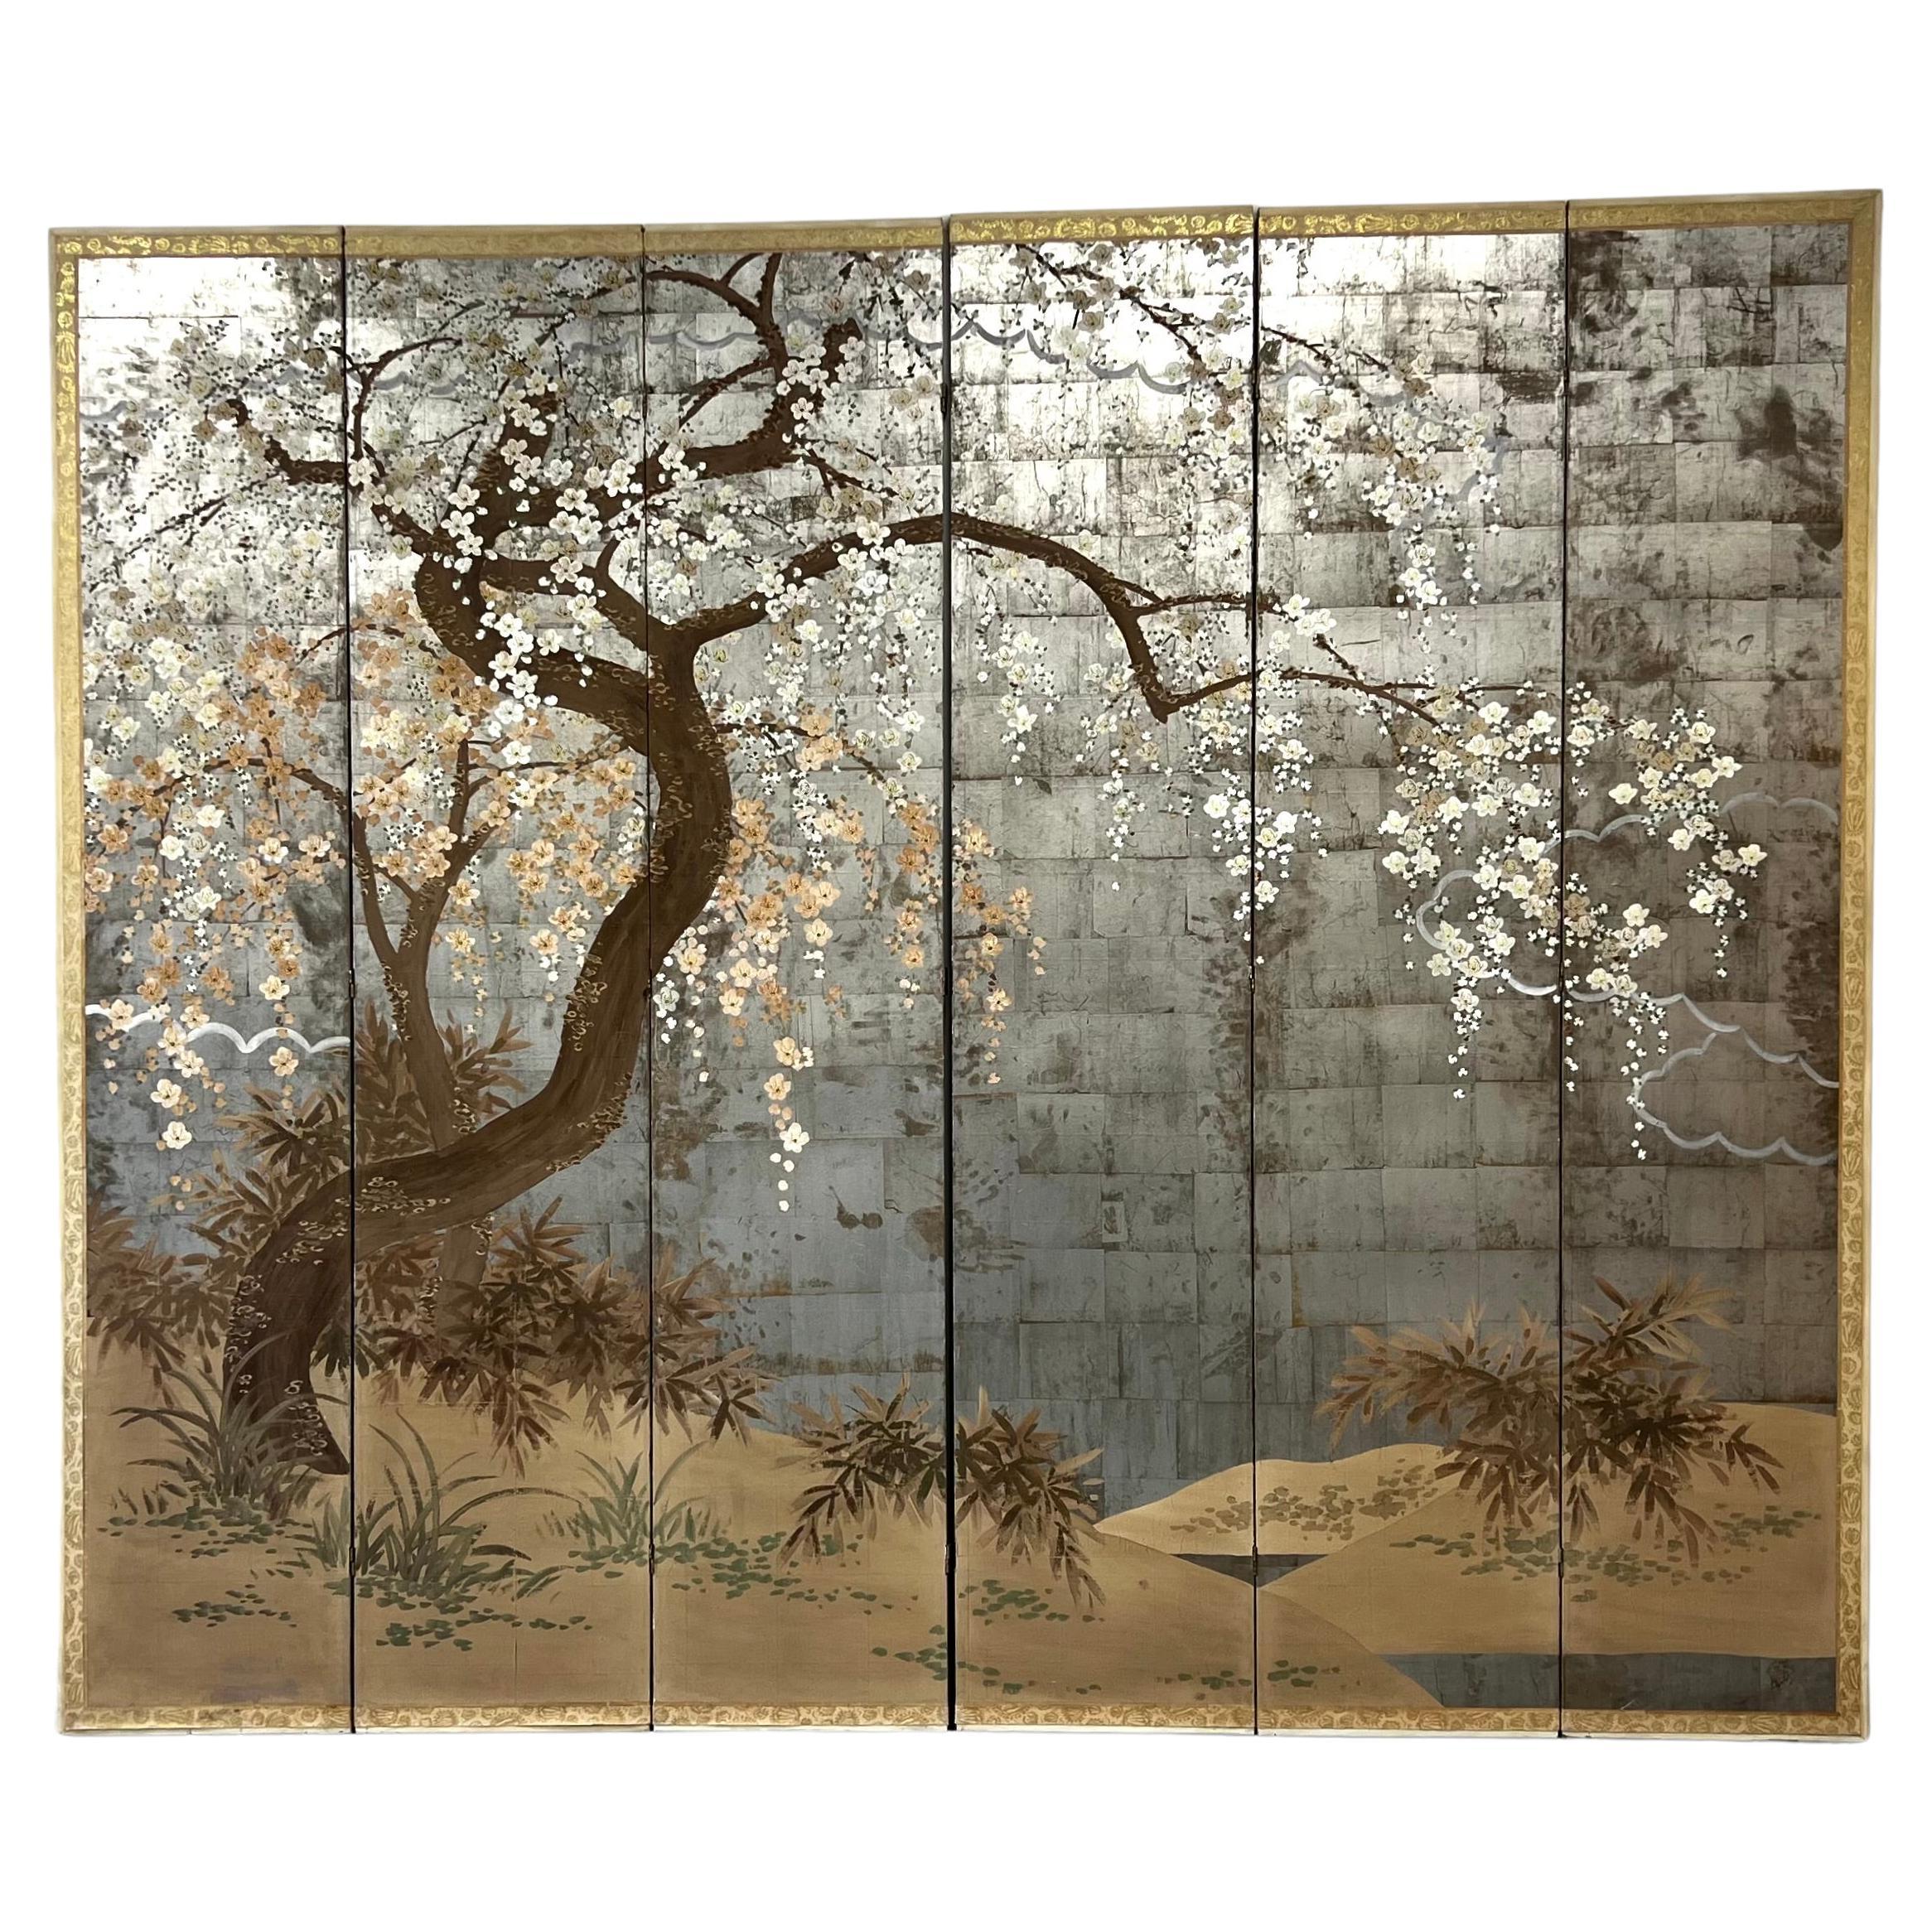 1960’s Large six panel hand painted cherry blossom tree on silver leaf background folding screen. 

In original vintage condition with minor wear consistent with age.
Minor loses at bottom of frame(see detail photos). The back is unfinished.